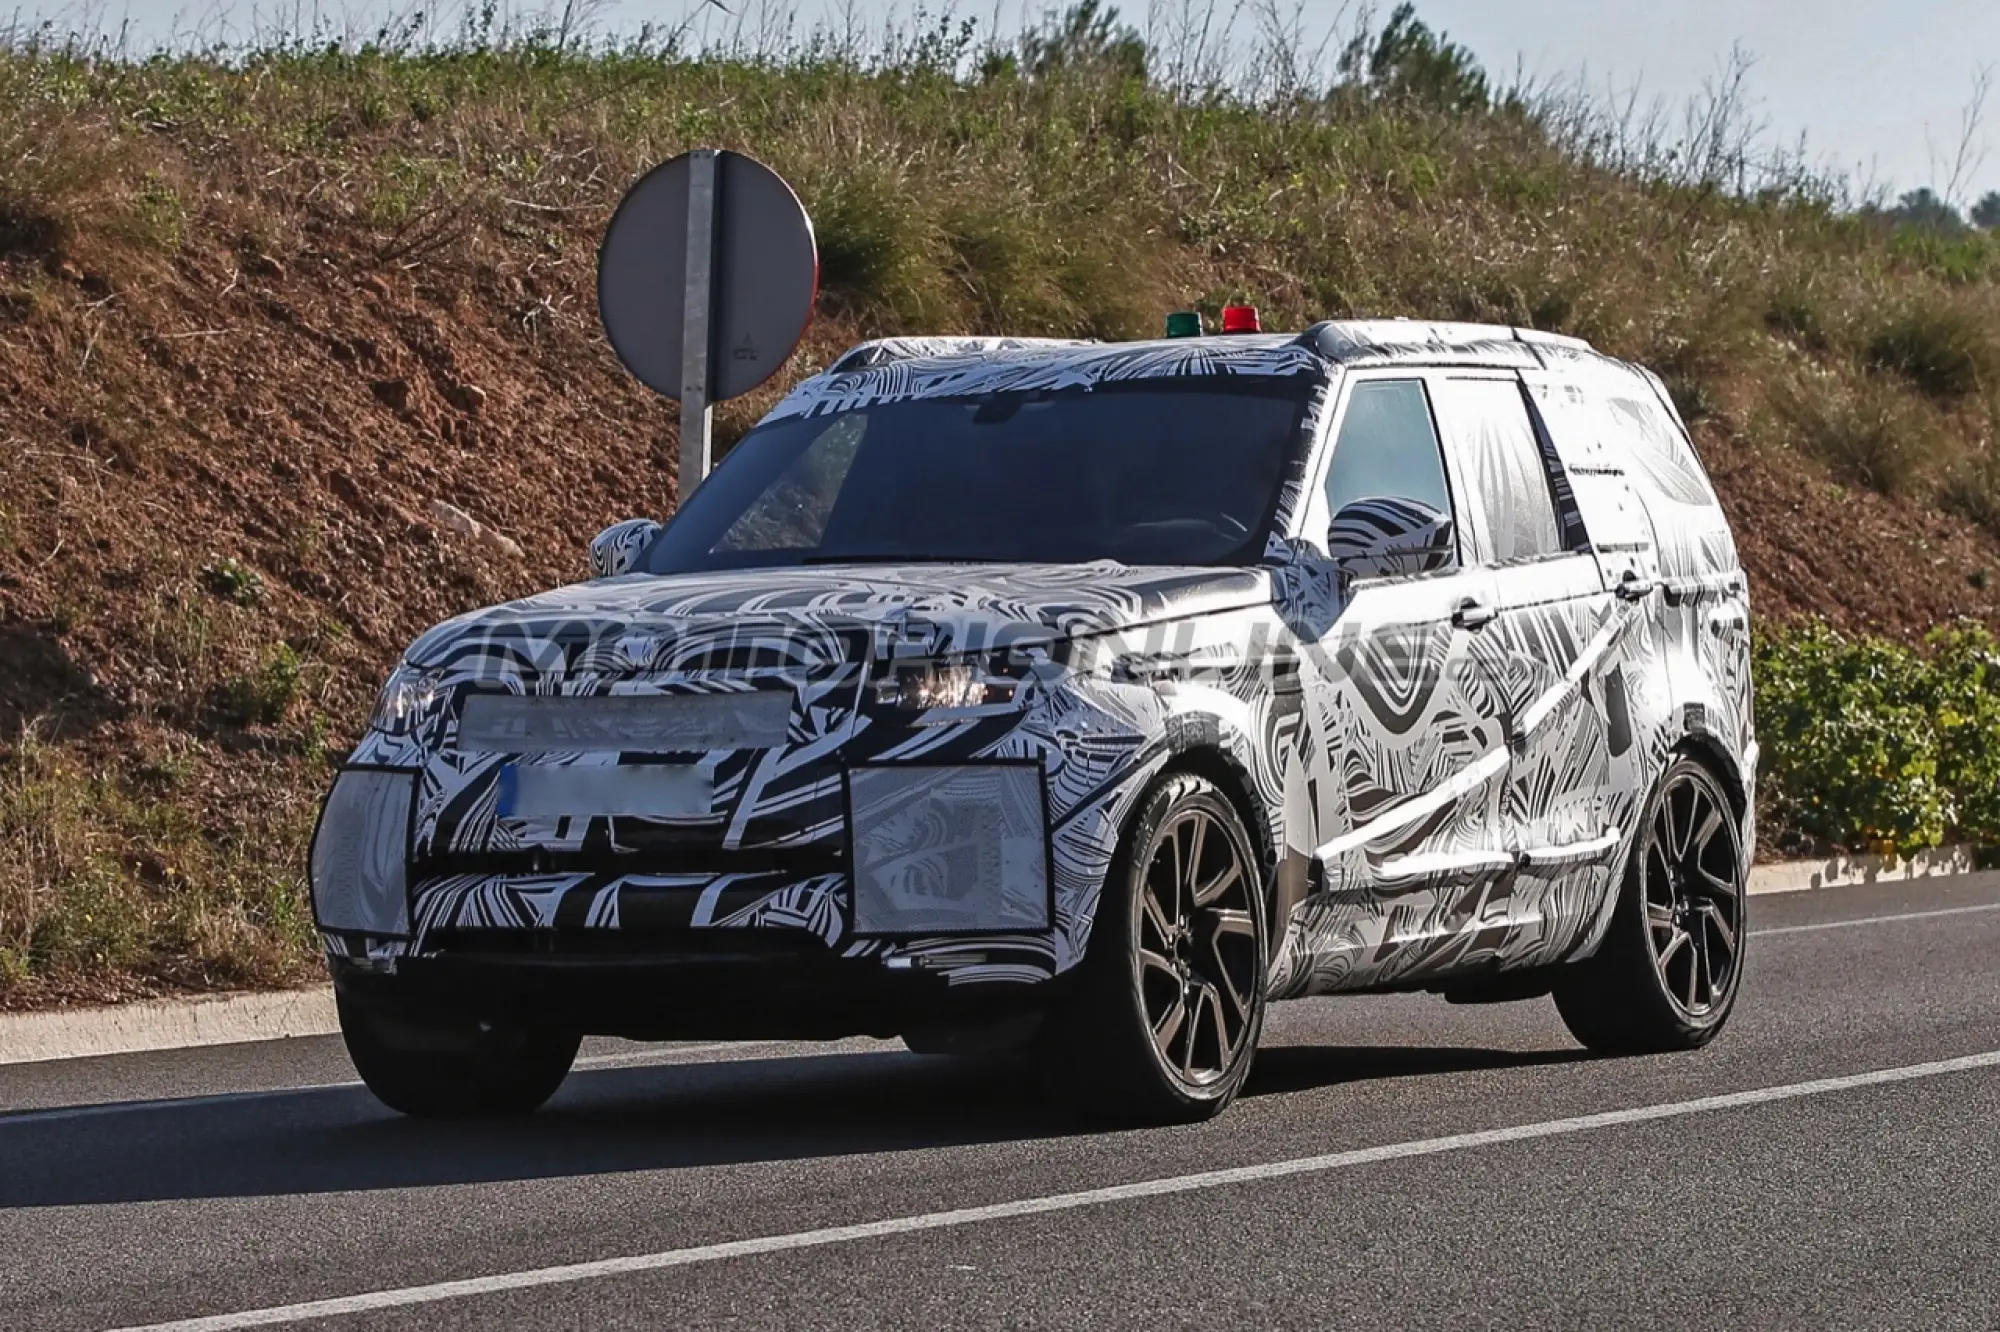 Land Rover Discovery MY 2016 - Foto spia 26-10-2015 - 2